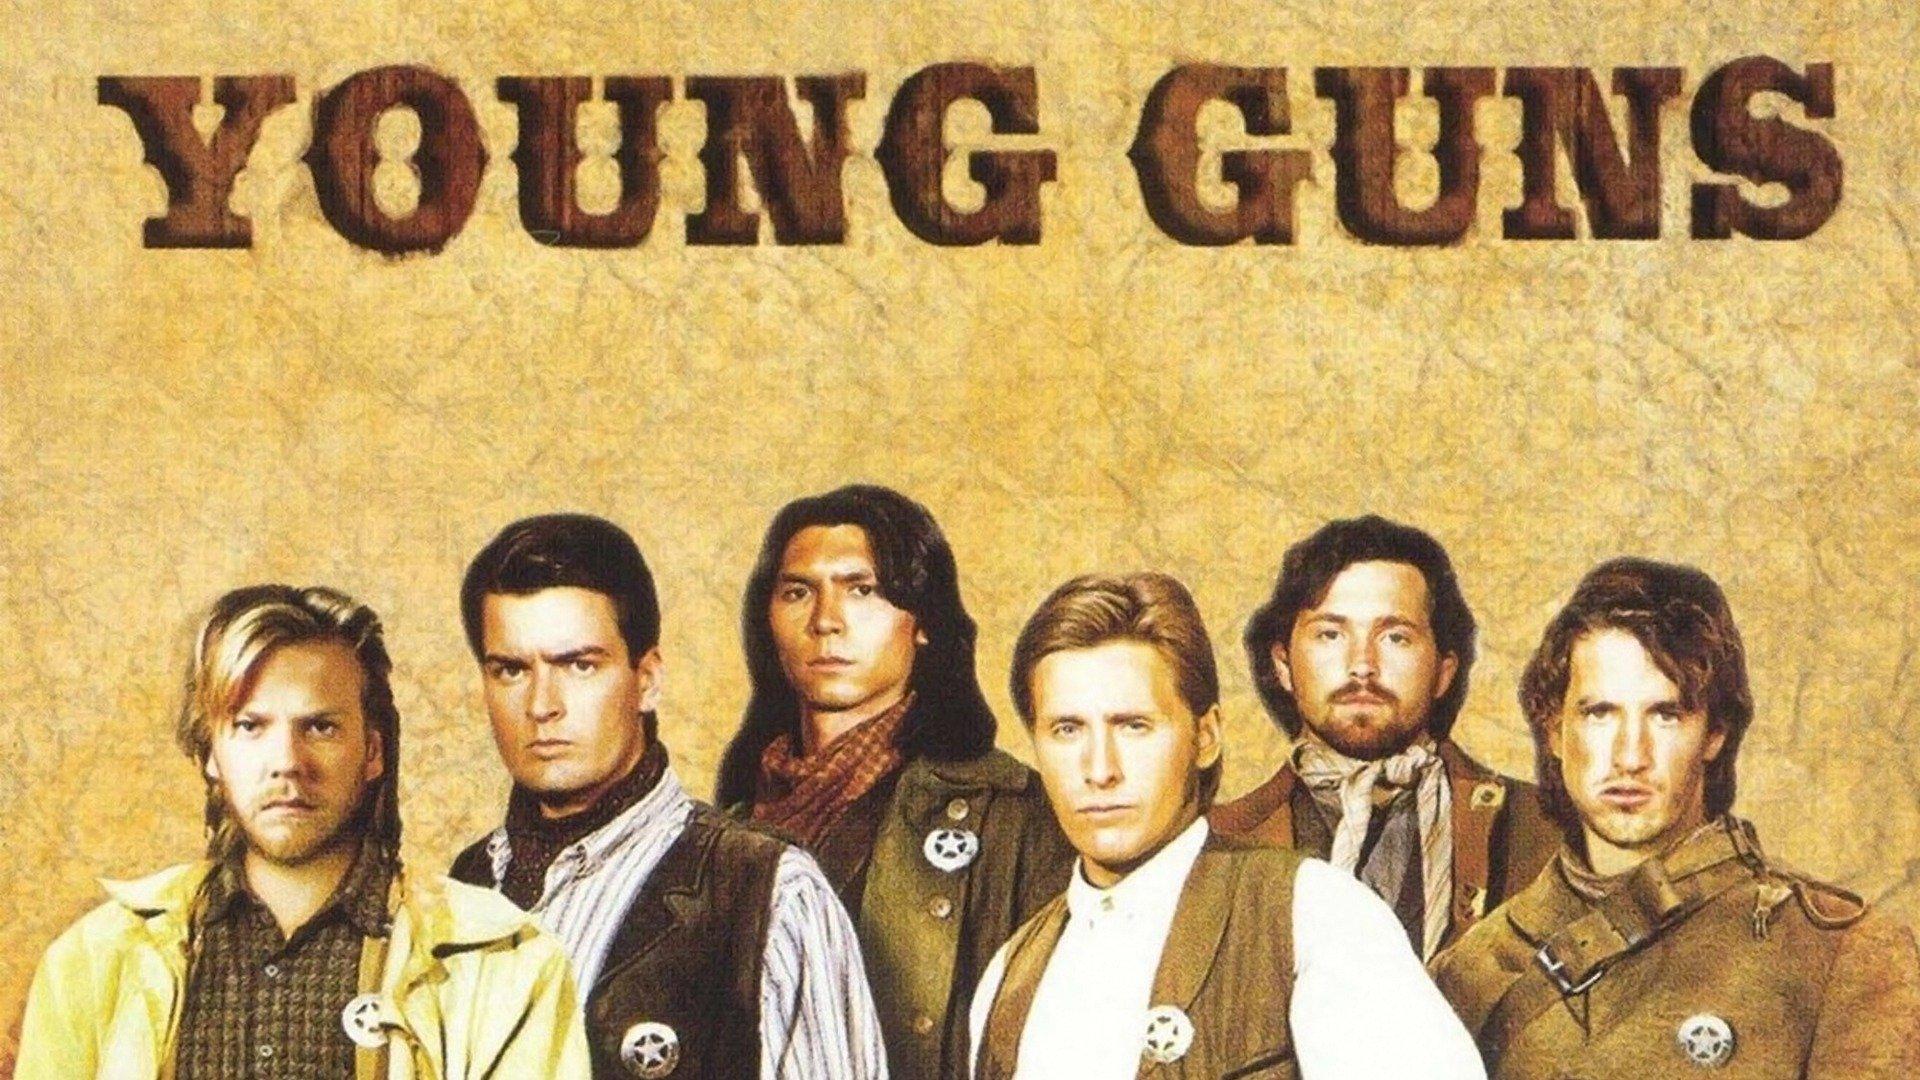 Watch Young Guns Streaming Online on Philo (Free Trial)